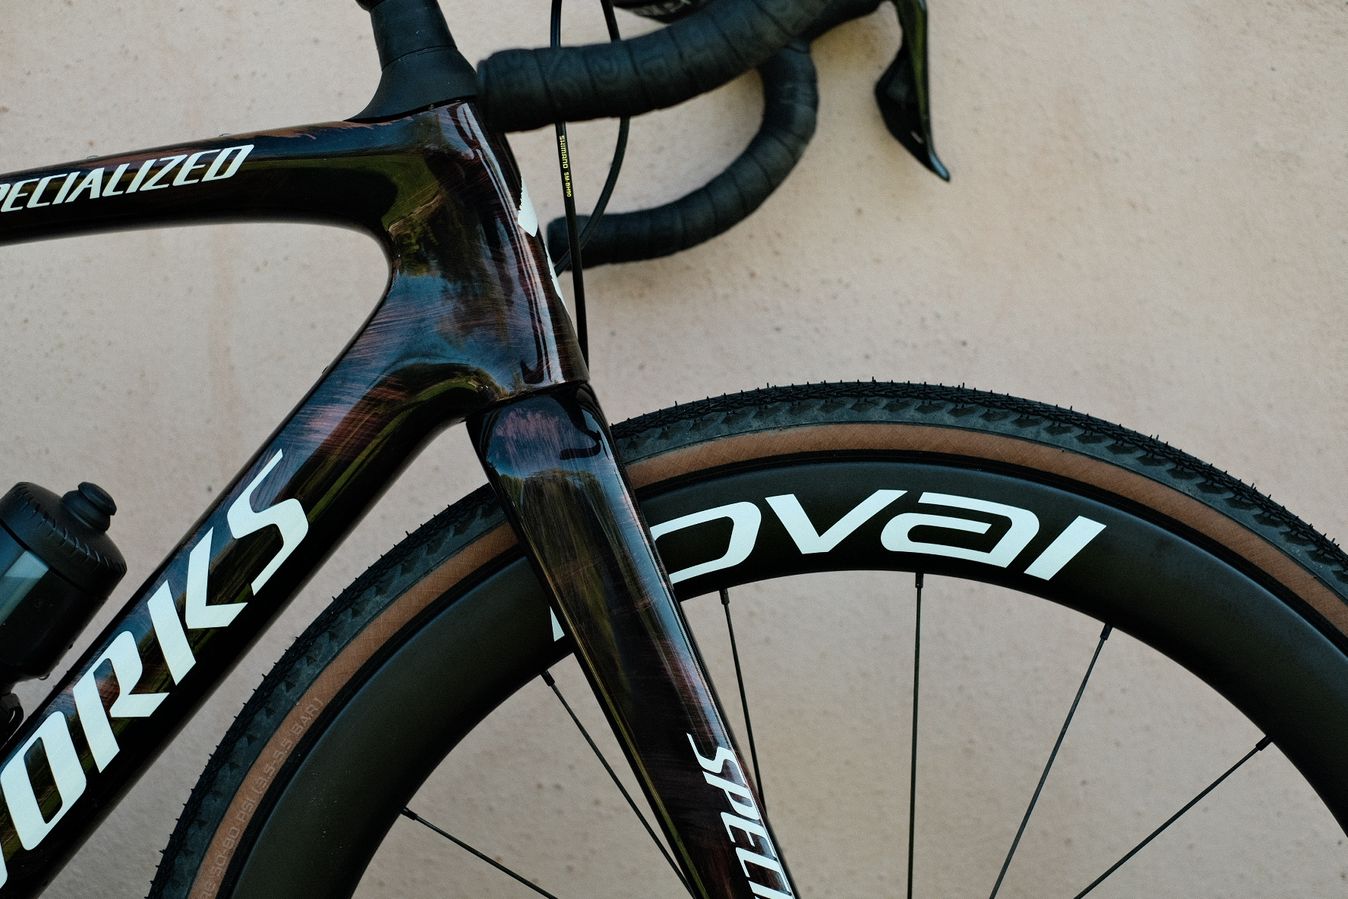 Specialized's in-house Roval brand provided the wheels